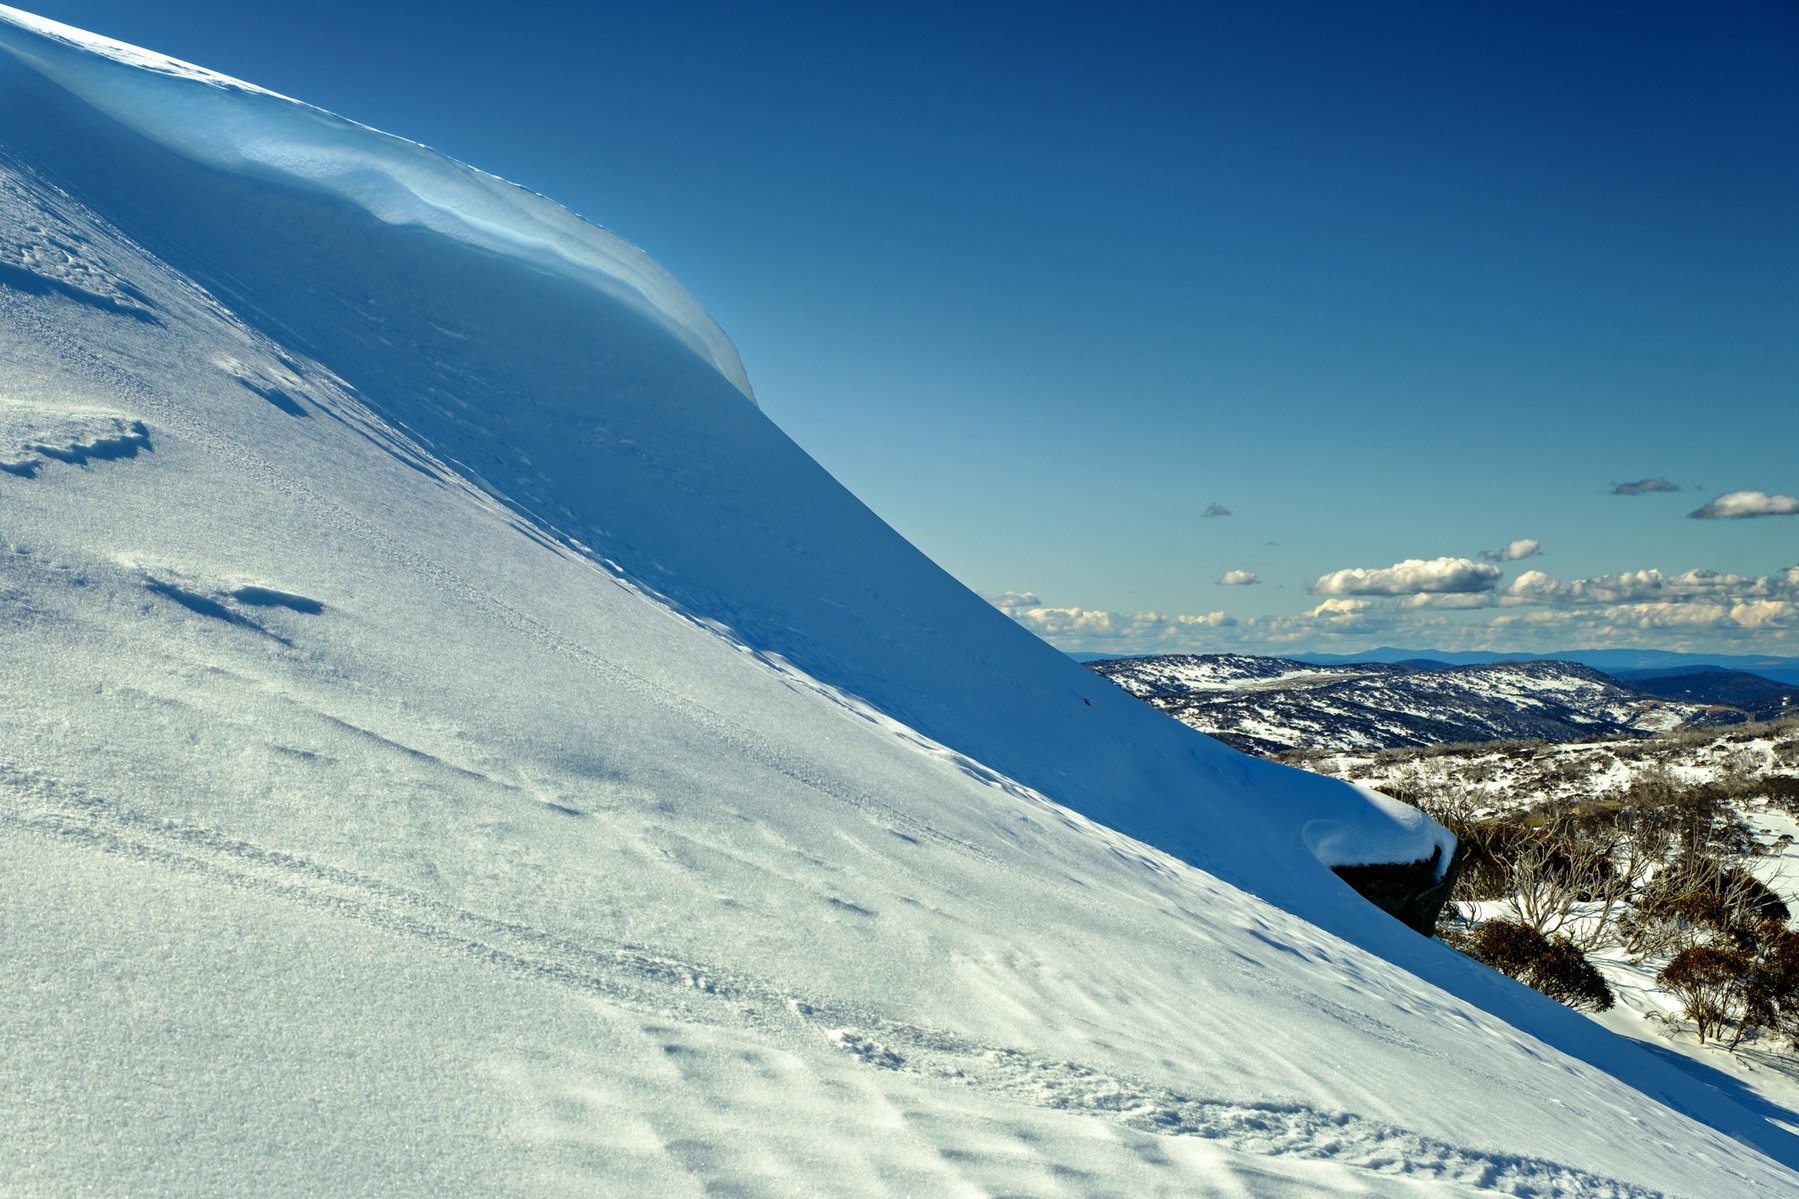 A snow cornice at Mt Wheatley in the NSW ski fields, with a blue sky behind.